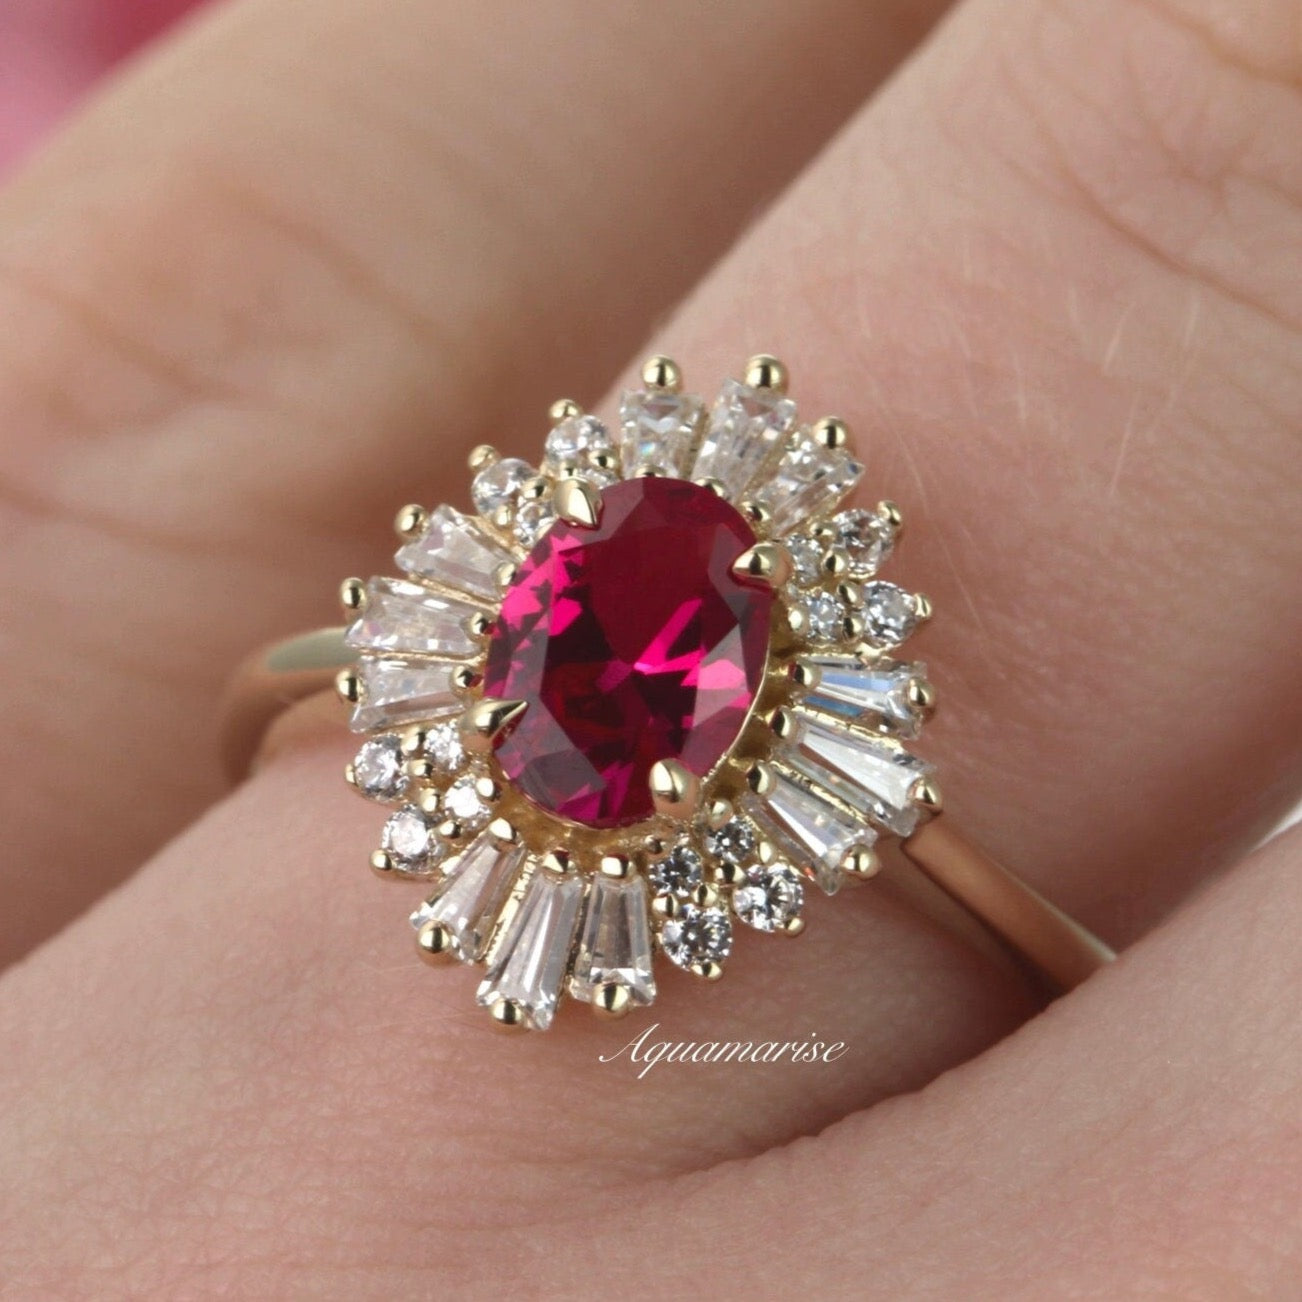 Victoria Ruby Ring- 14K Yellow Gold Vermeil